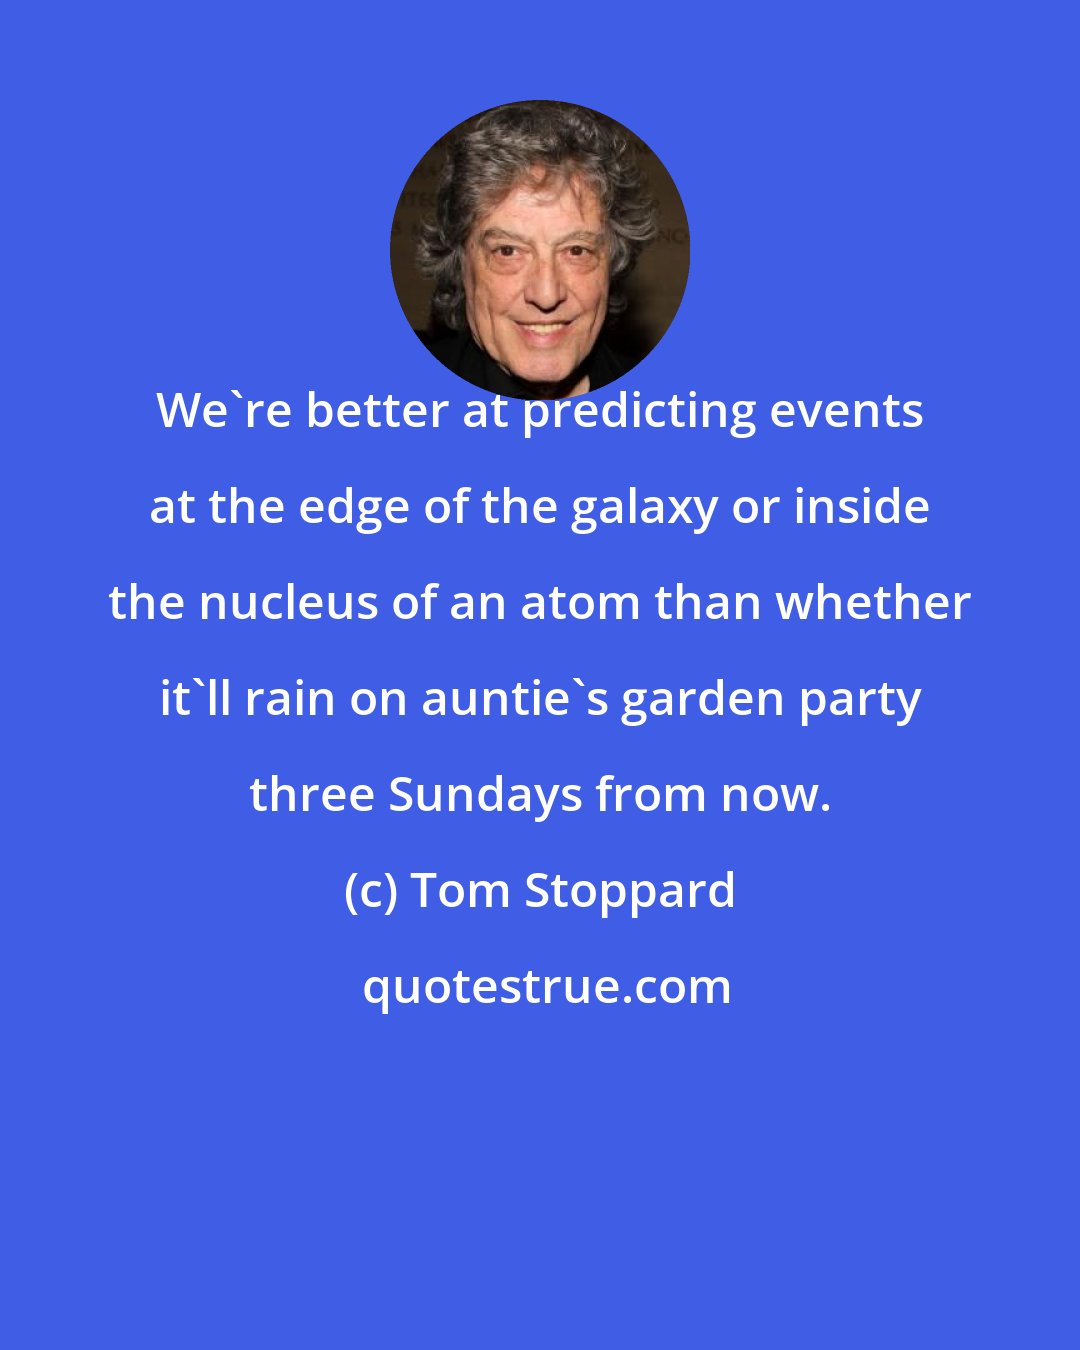 Tom Stoppard: We're better at predicting events at the edge of the galaxy or inside the nucleus of an atom than whether it'll rain on auntie's garden party three Sundays from now.